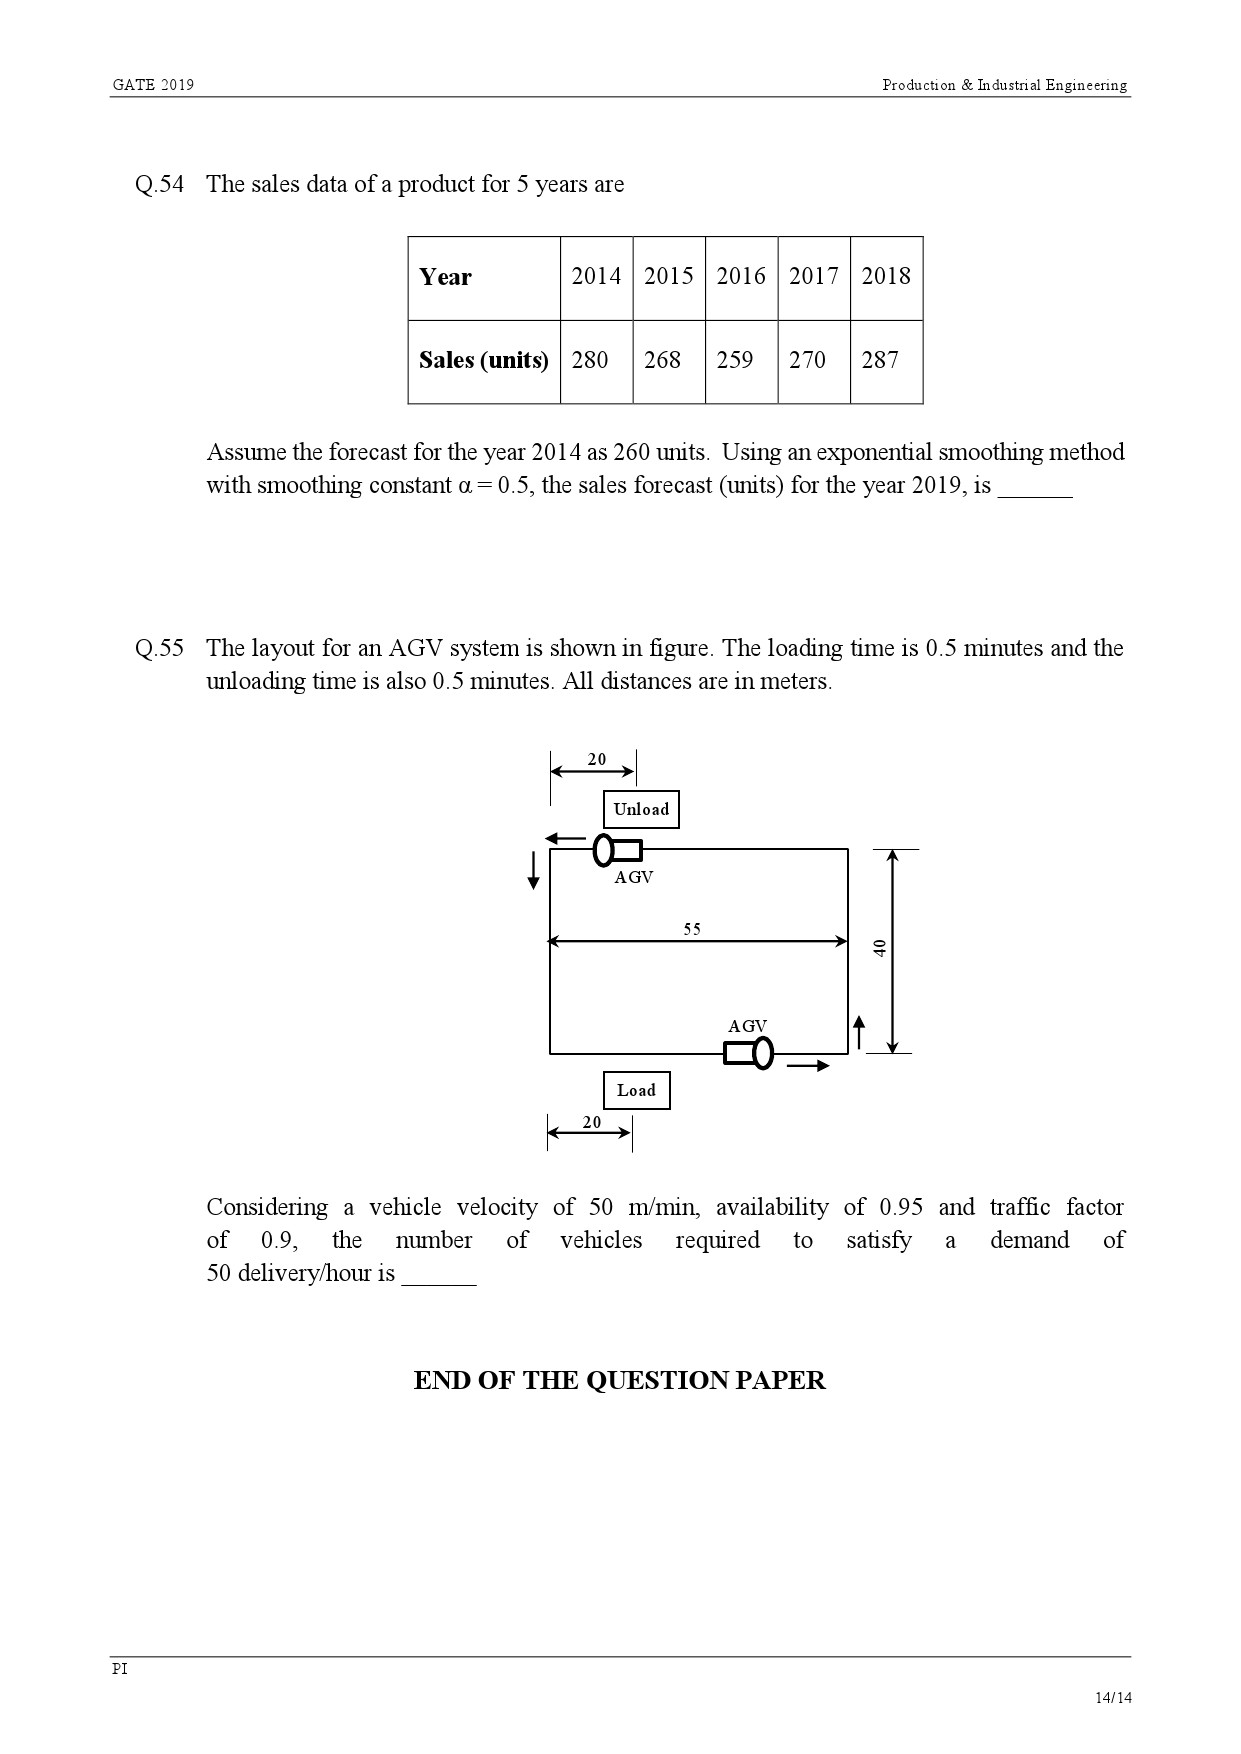 GATE Exam Question Paper 2019 Production and Industrial Engineering 17